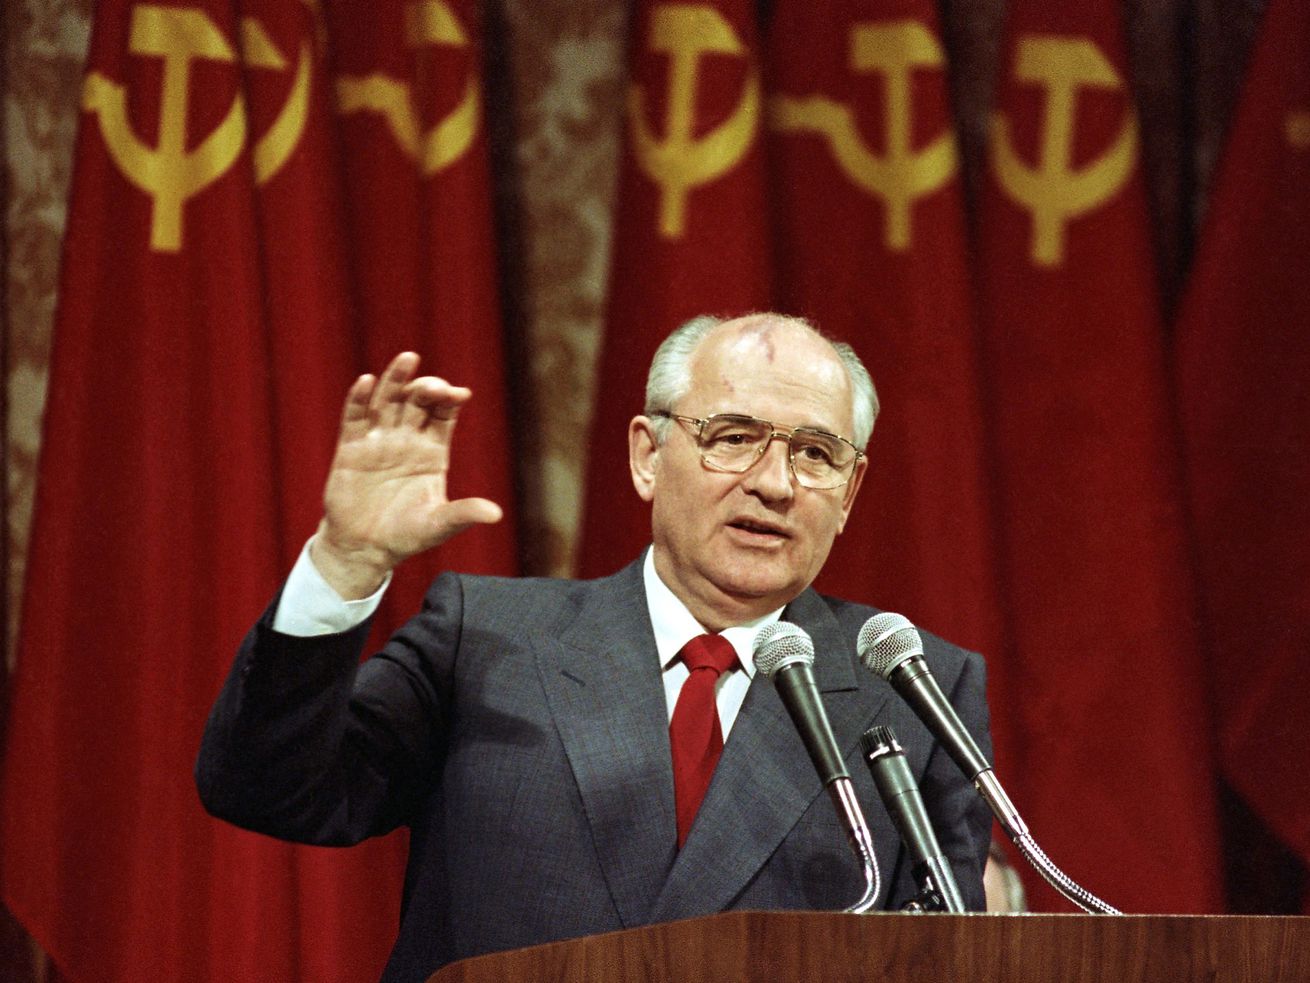 Mikhail Gorbachev and the merits of the inside game